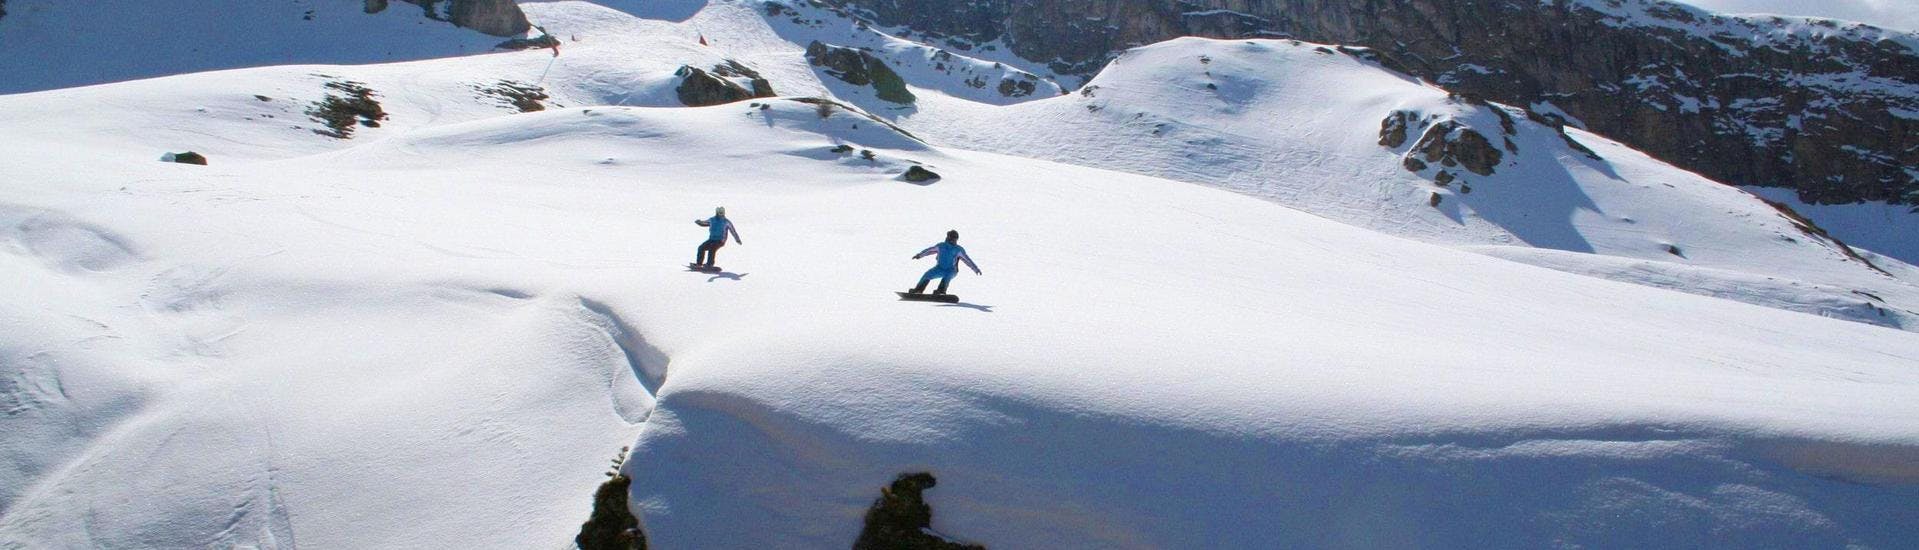 A snowboarding instructor and a learner are gliding along an untouched powder snow slope during one of their Private Snowboarding Lessons for Kids & Adults - All Levels in the ski resort of Ischgl.